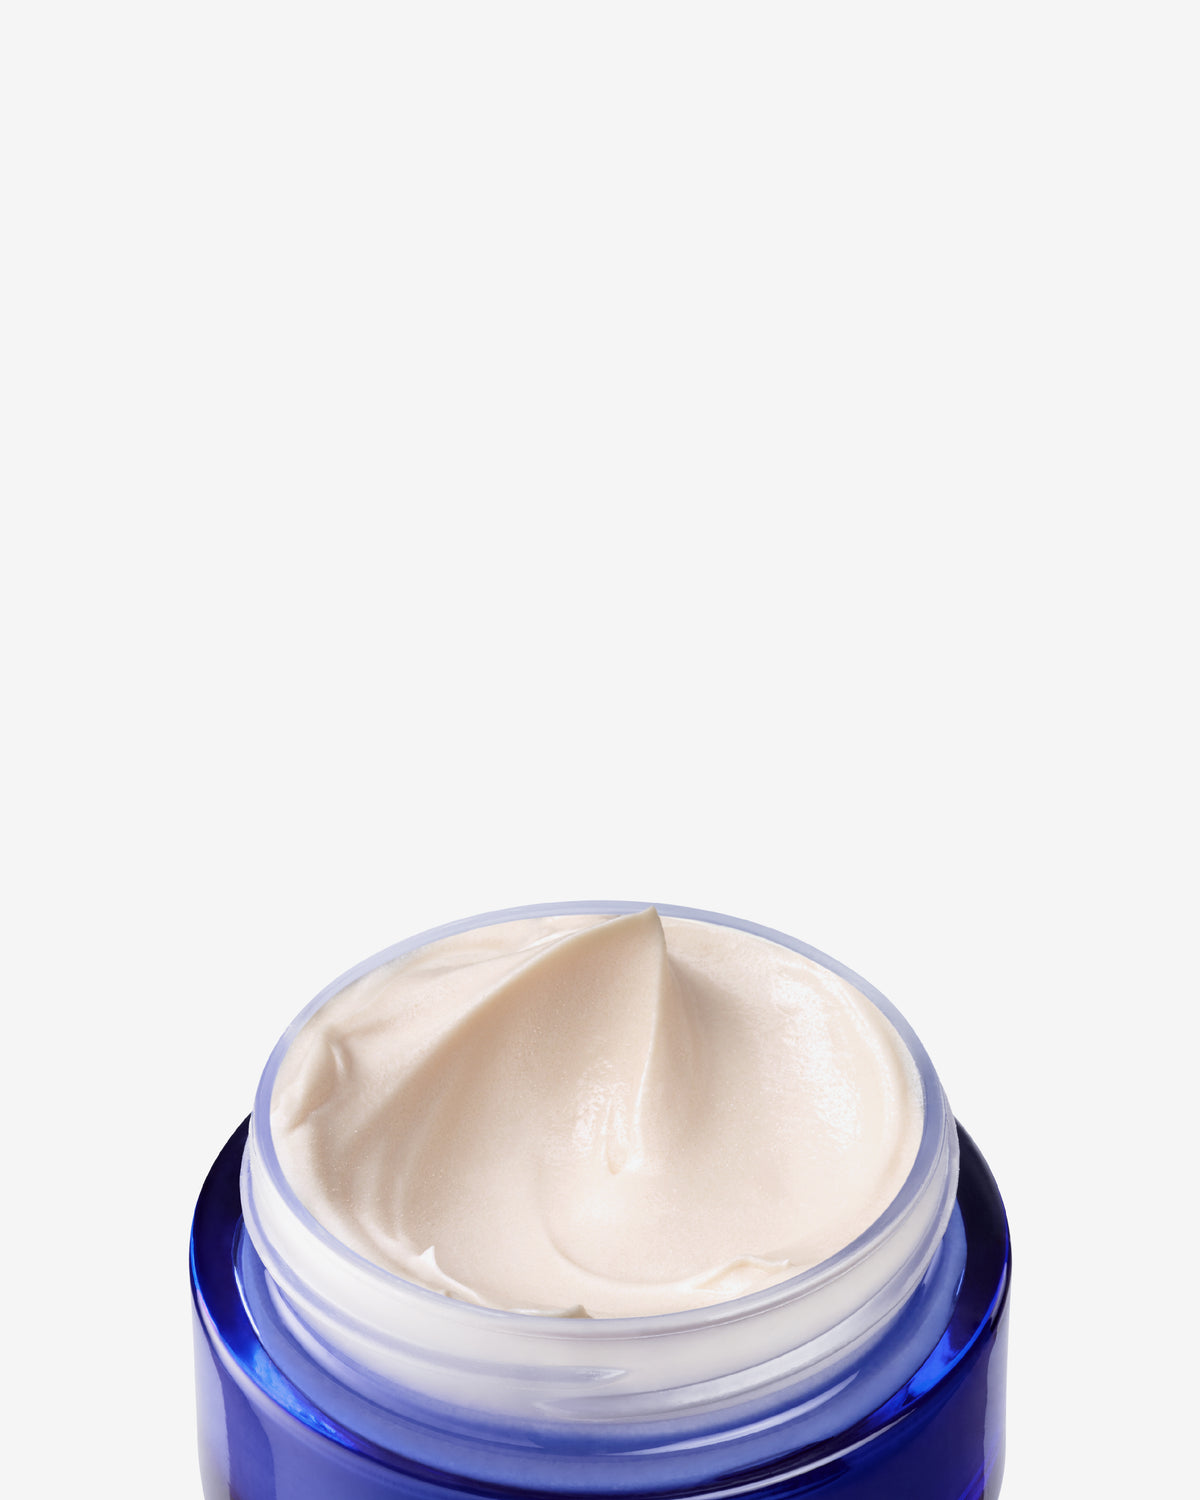 Blue Therapy Multi Defender SPF 25 Normal To Combination Skin